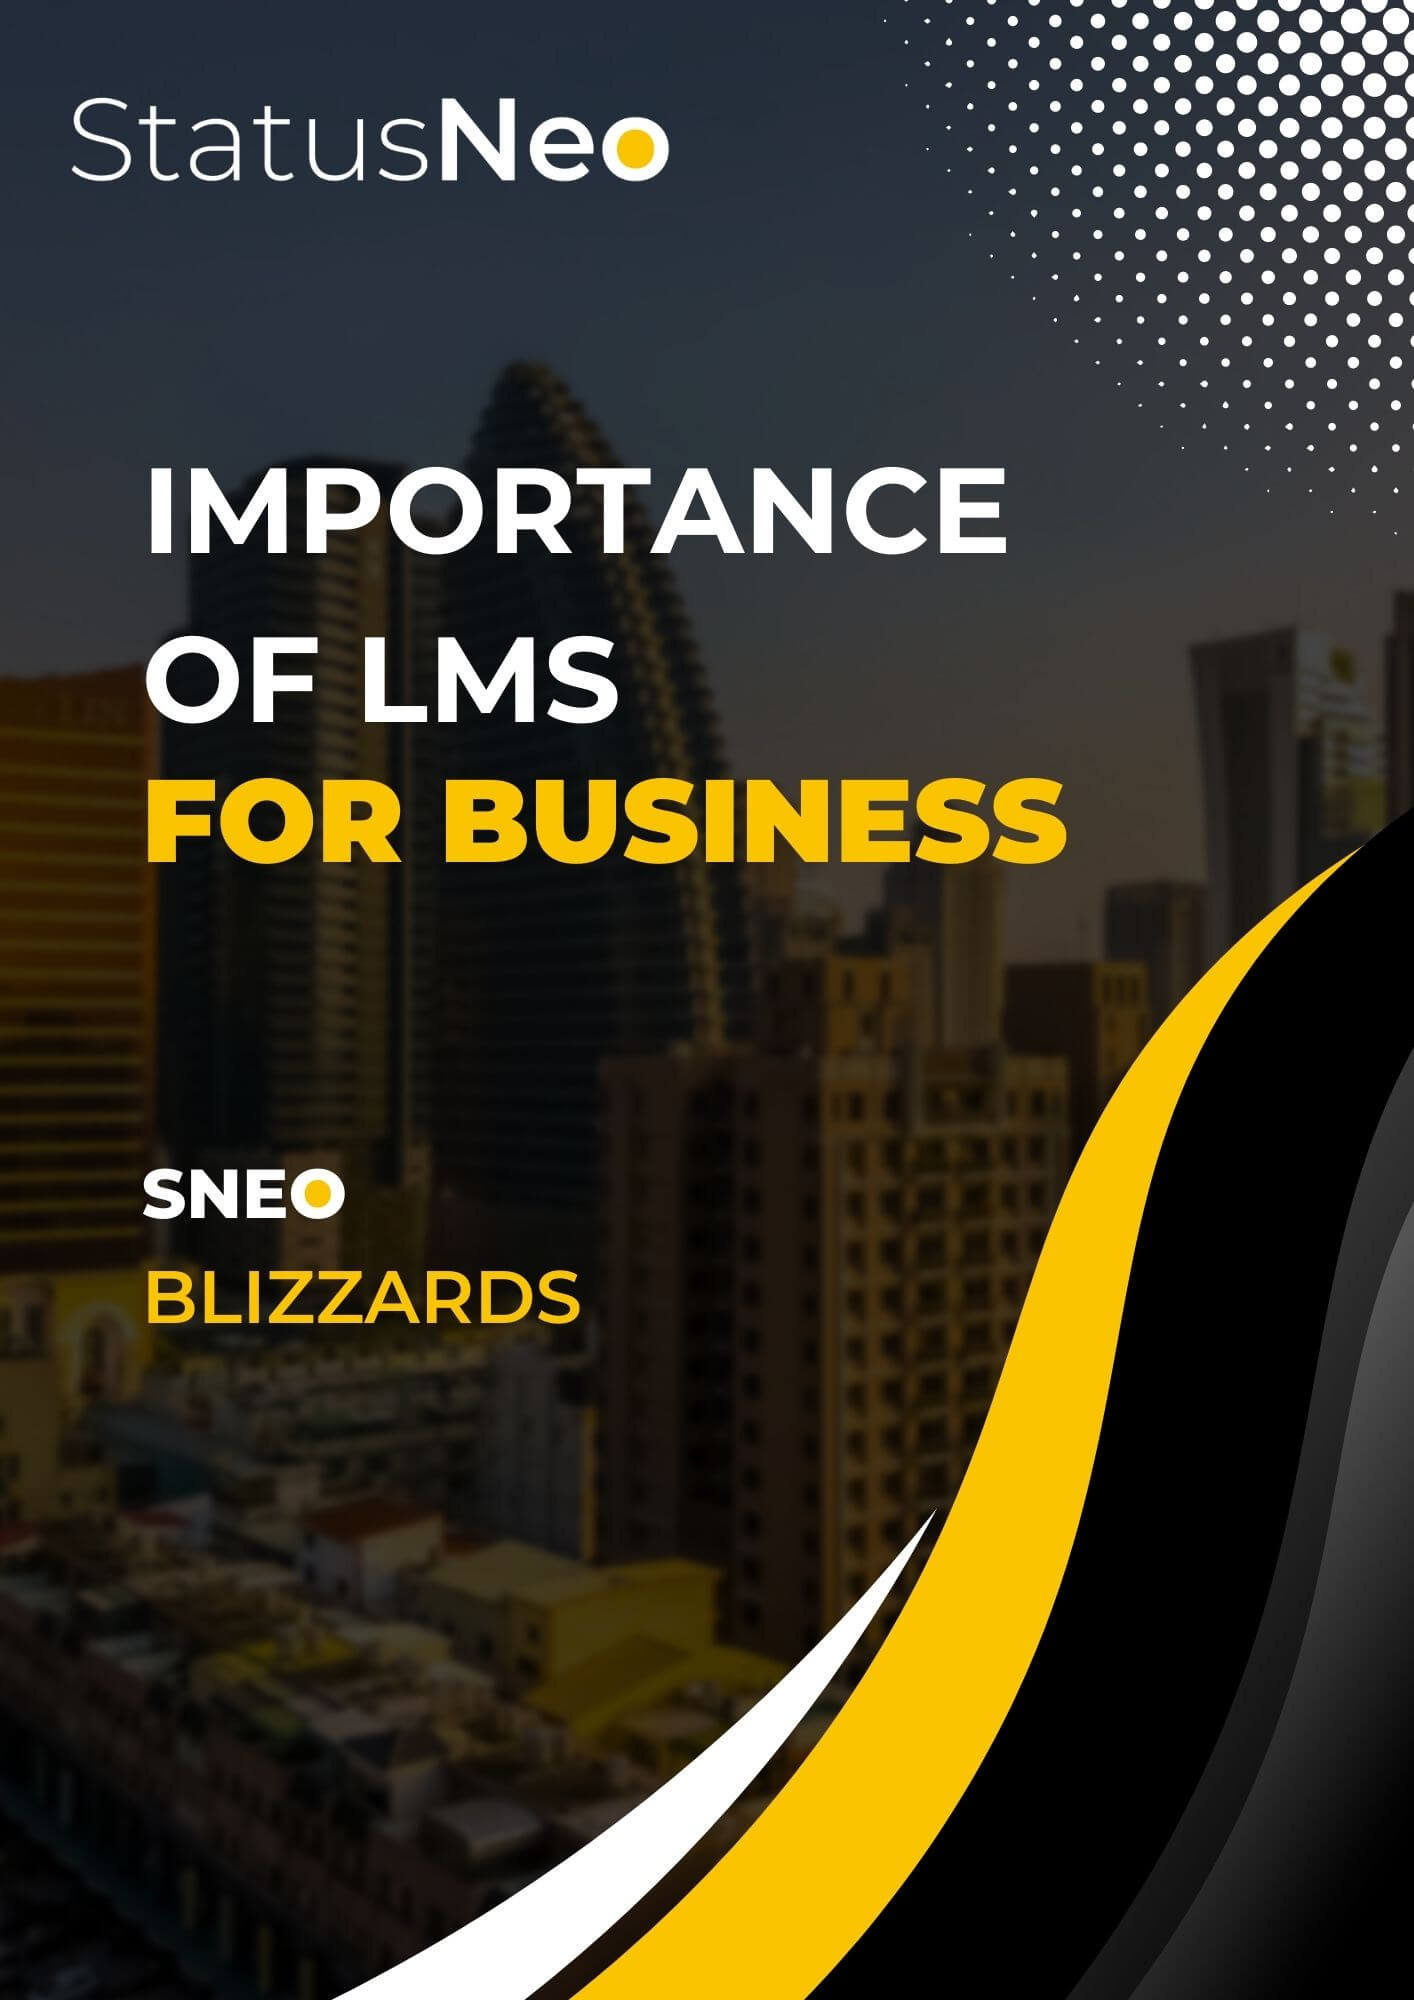 Importance of LMS for Business